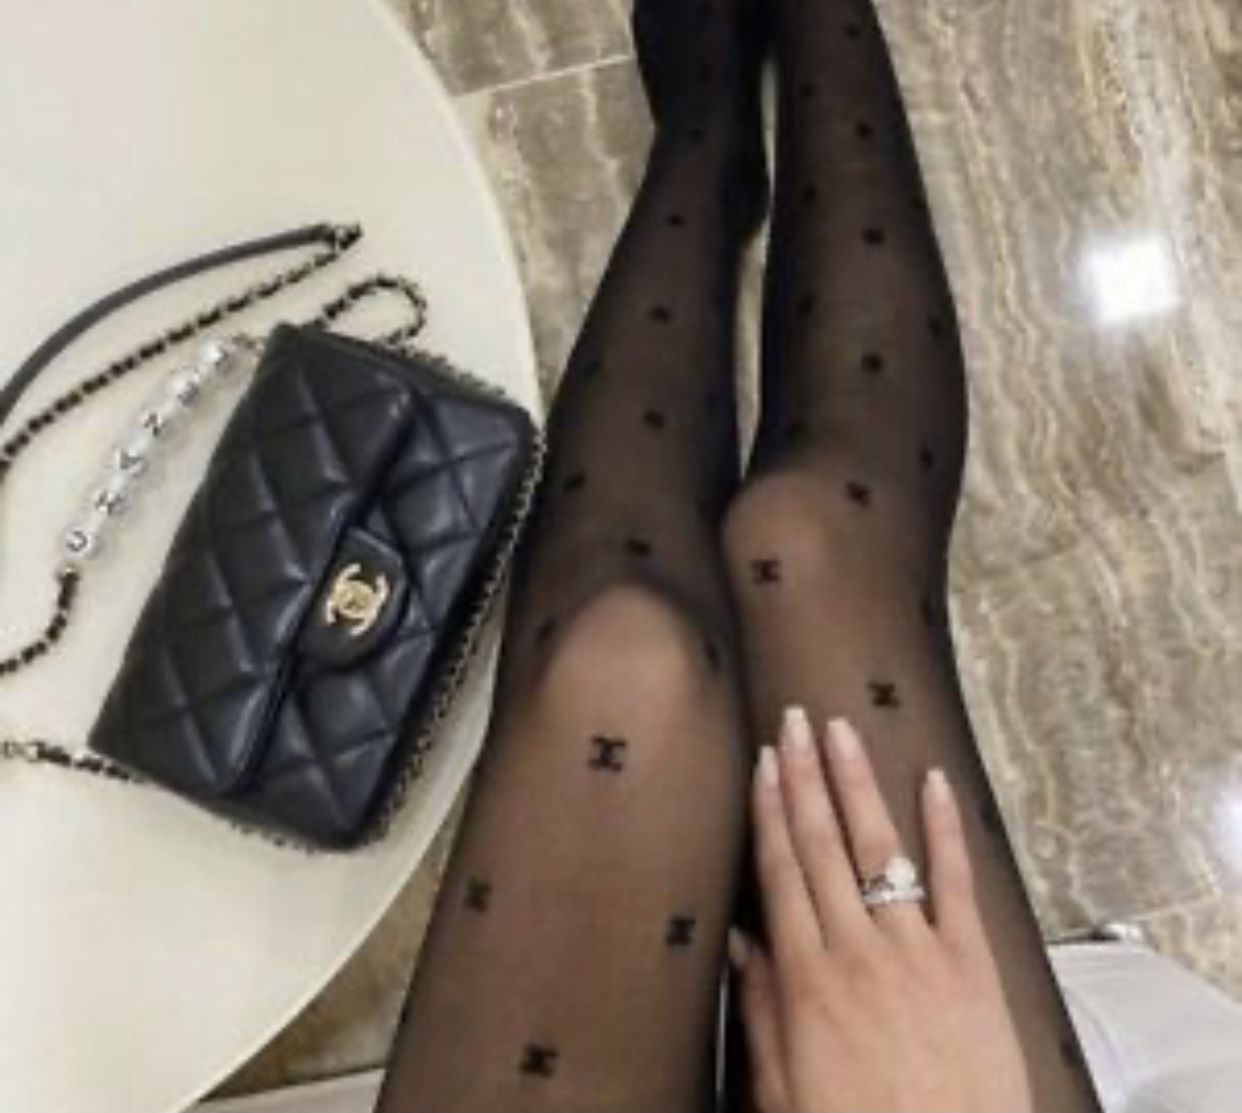 GG CC LV Balen Tights Pantyhose for Sale in Los Angeles, CA - OfferUp